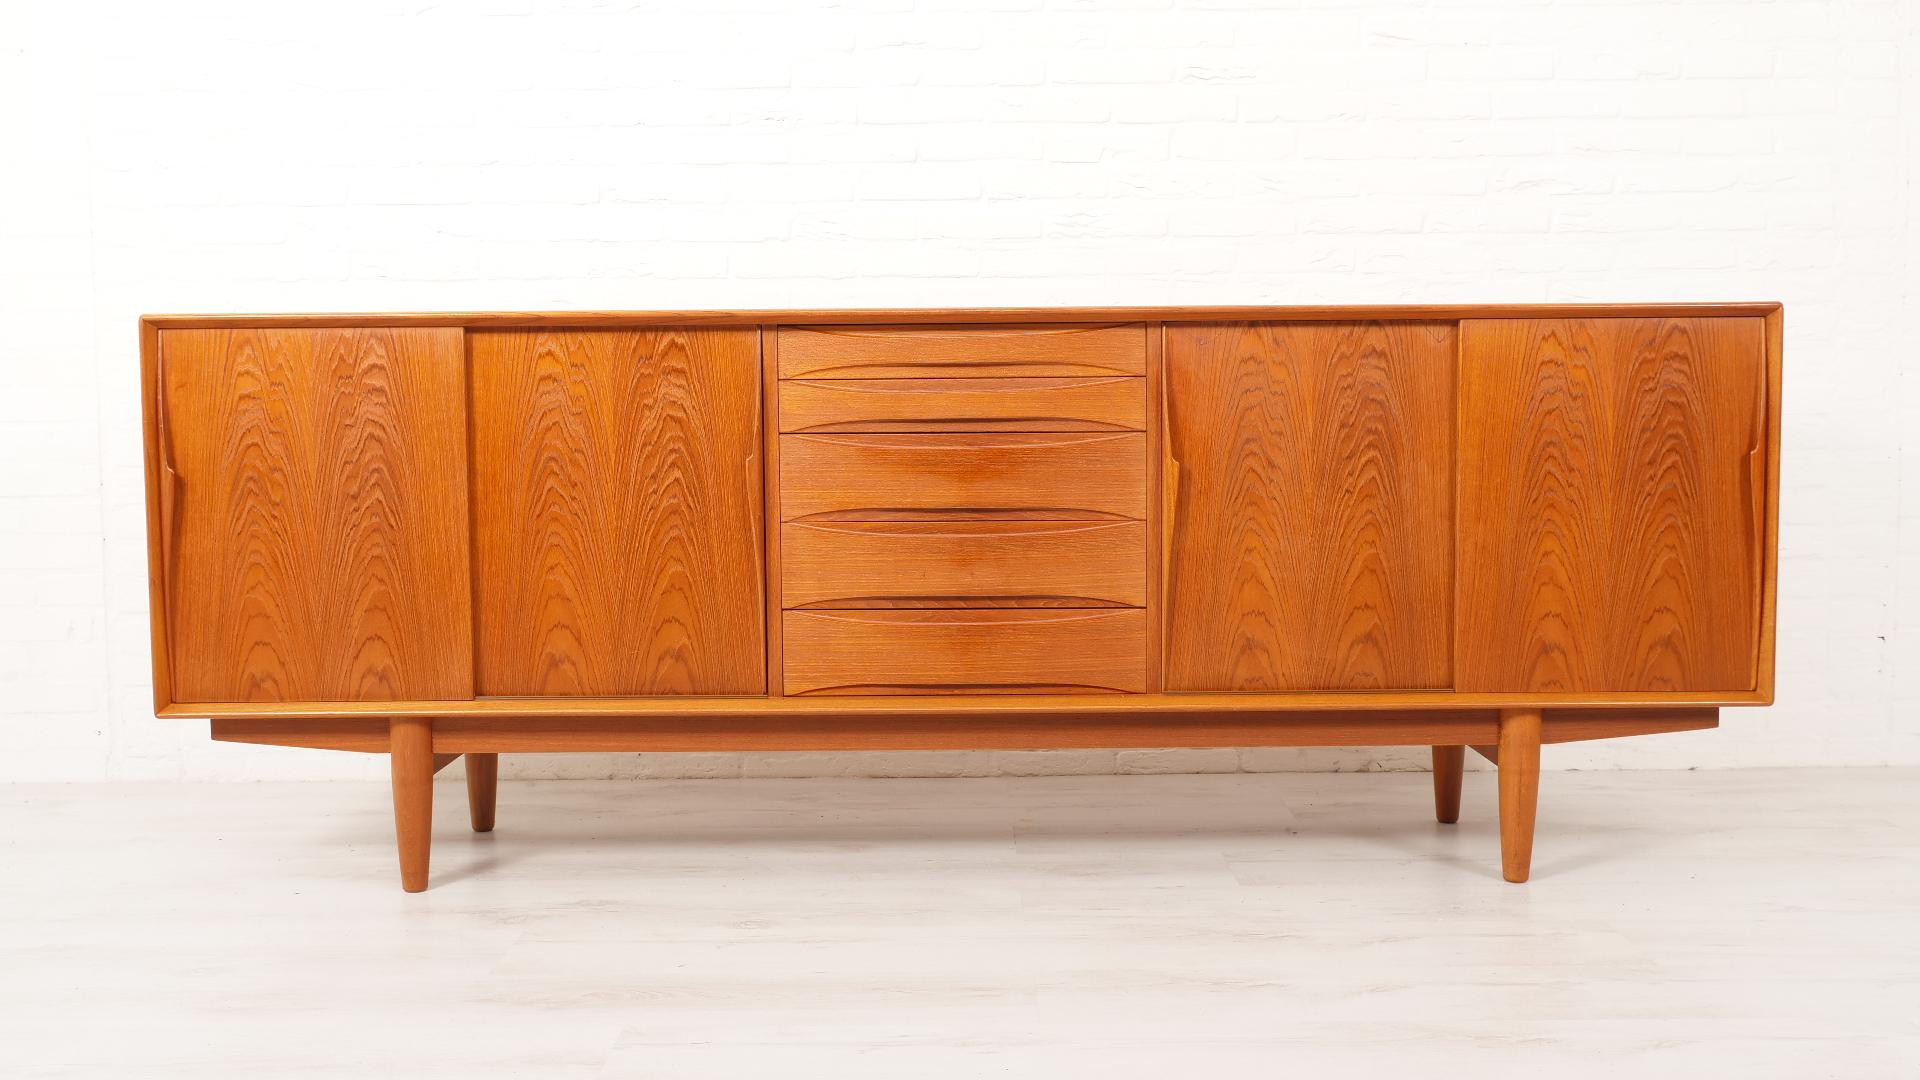 This vintage teak sideboard by Arne Vodder for renowned brand Dyrlund is a true showpiece from 1960. With its clean lines and craftsmanship, this Danish furniture exudes timeless elegance. The sideboard offers both style and functionality, perfect